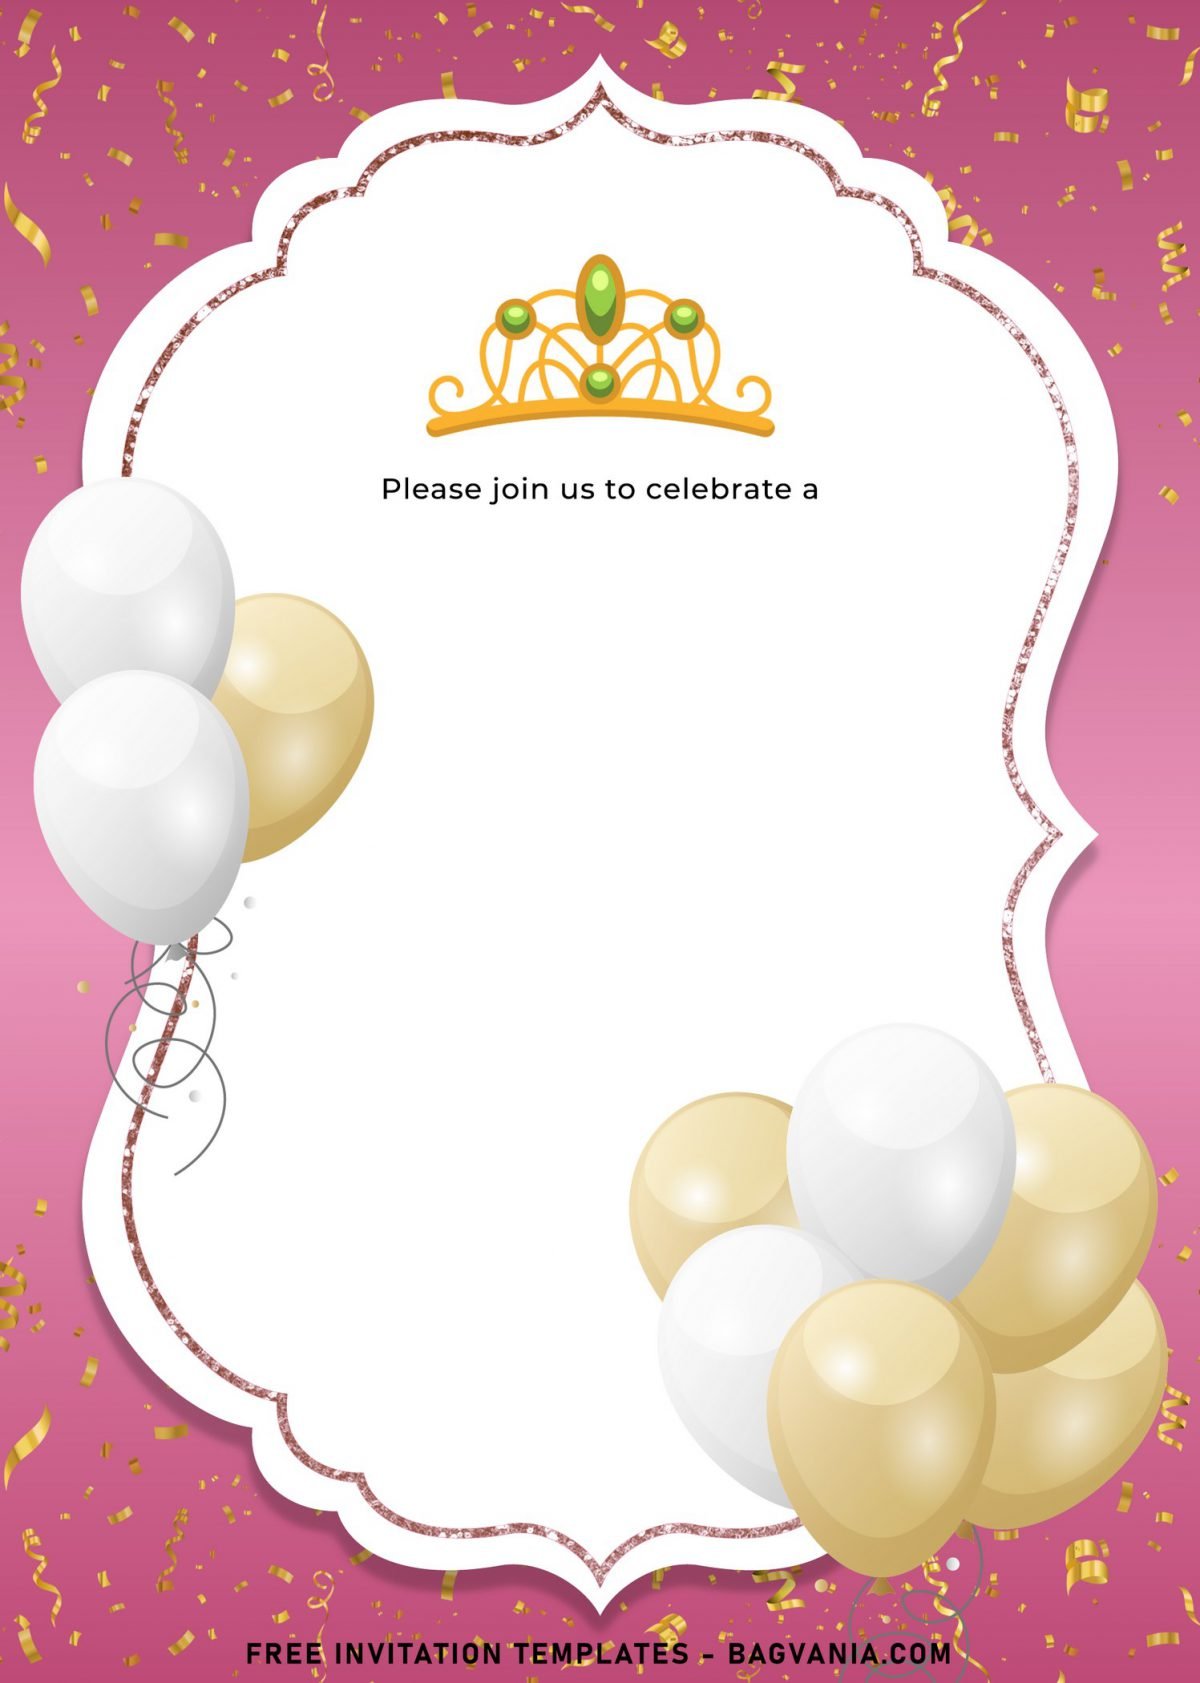 7+ Elegant Birthday Invitation Templates For Your Kid's Upcoming Birthday and has Gold Confetti